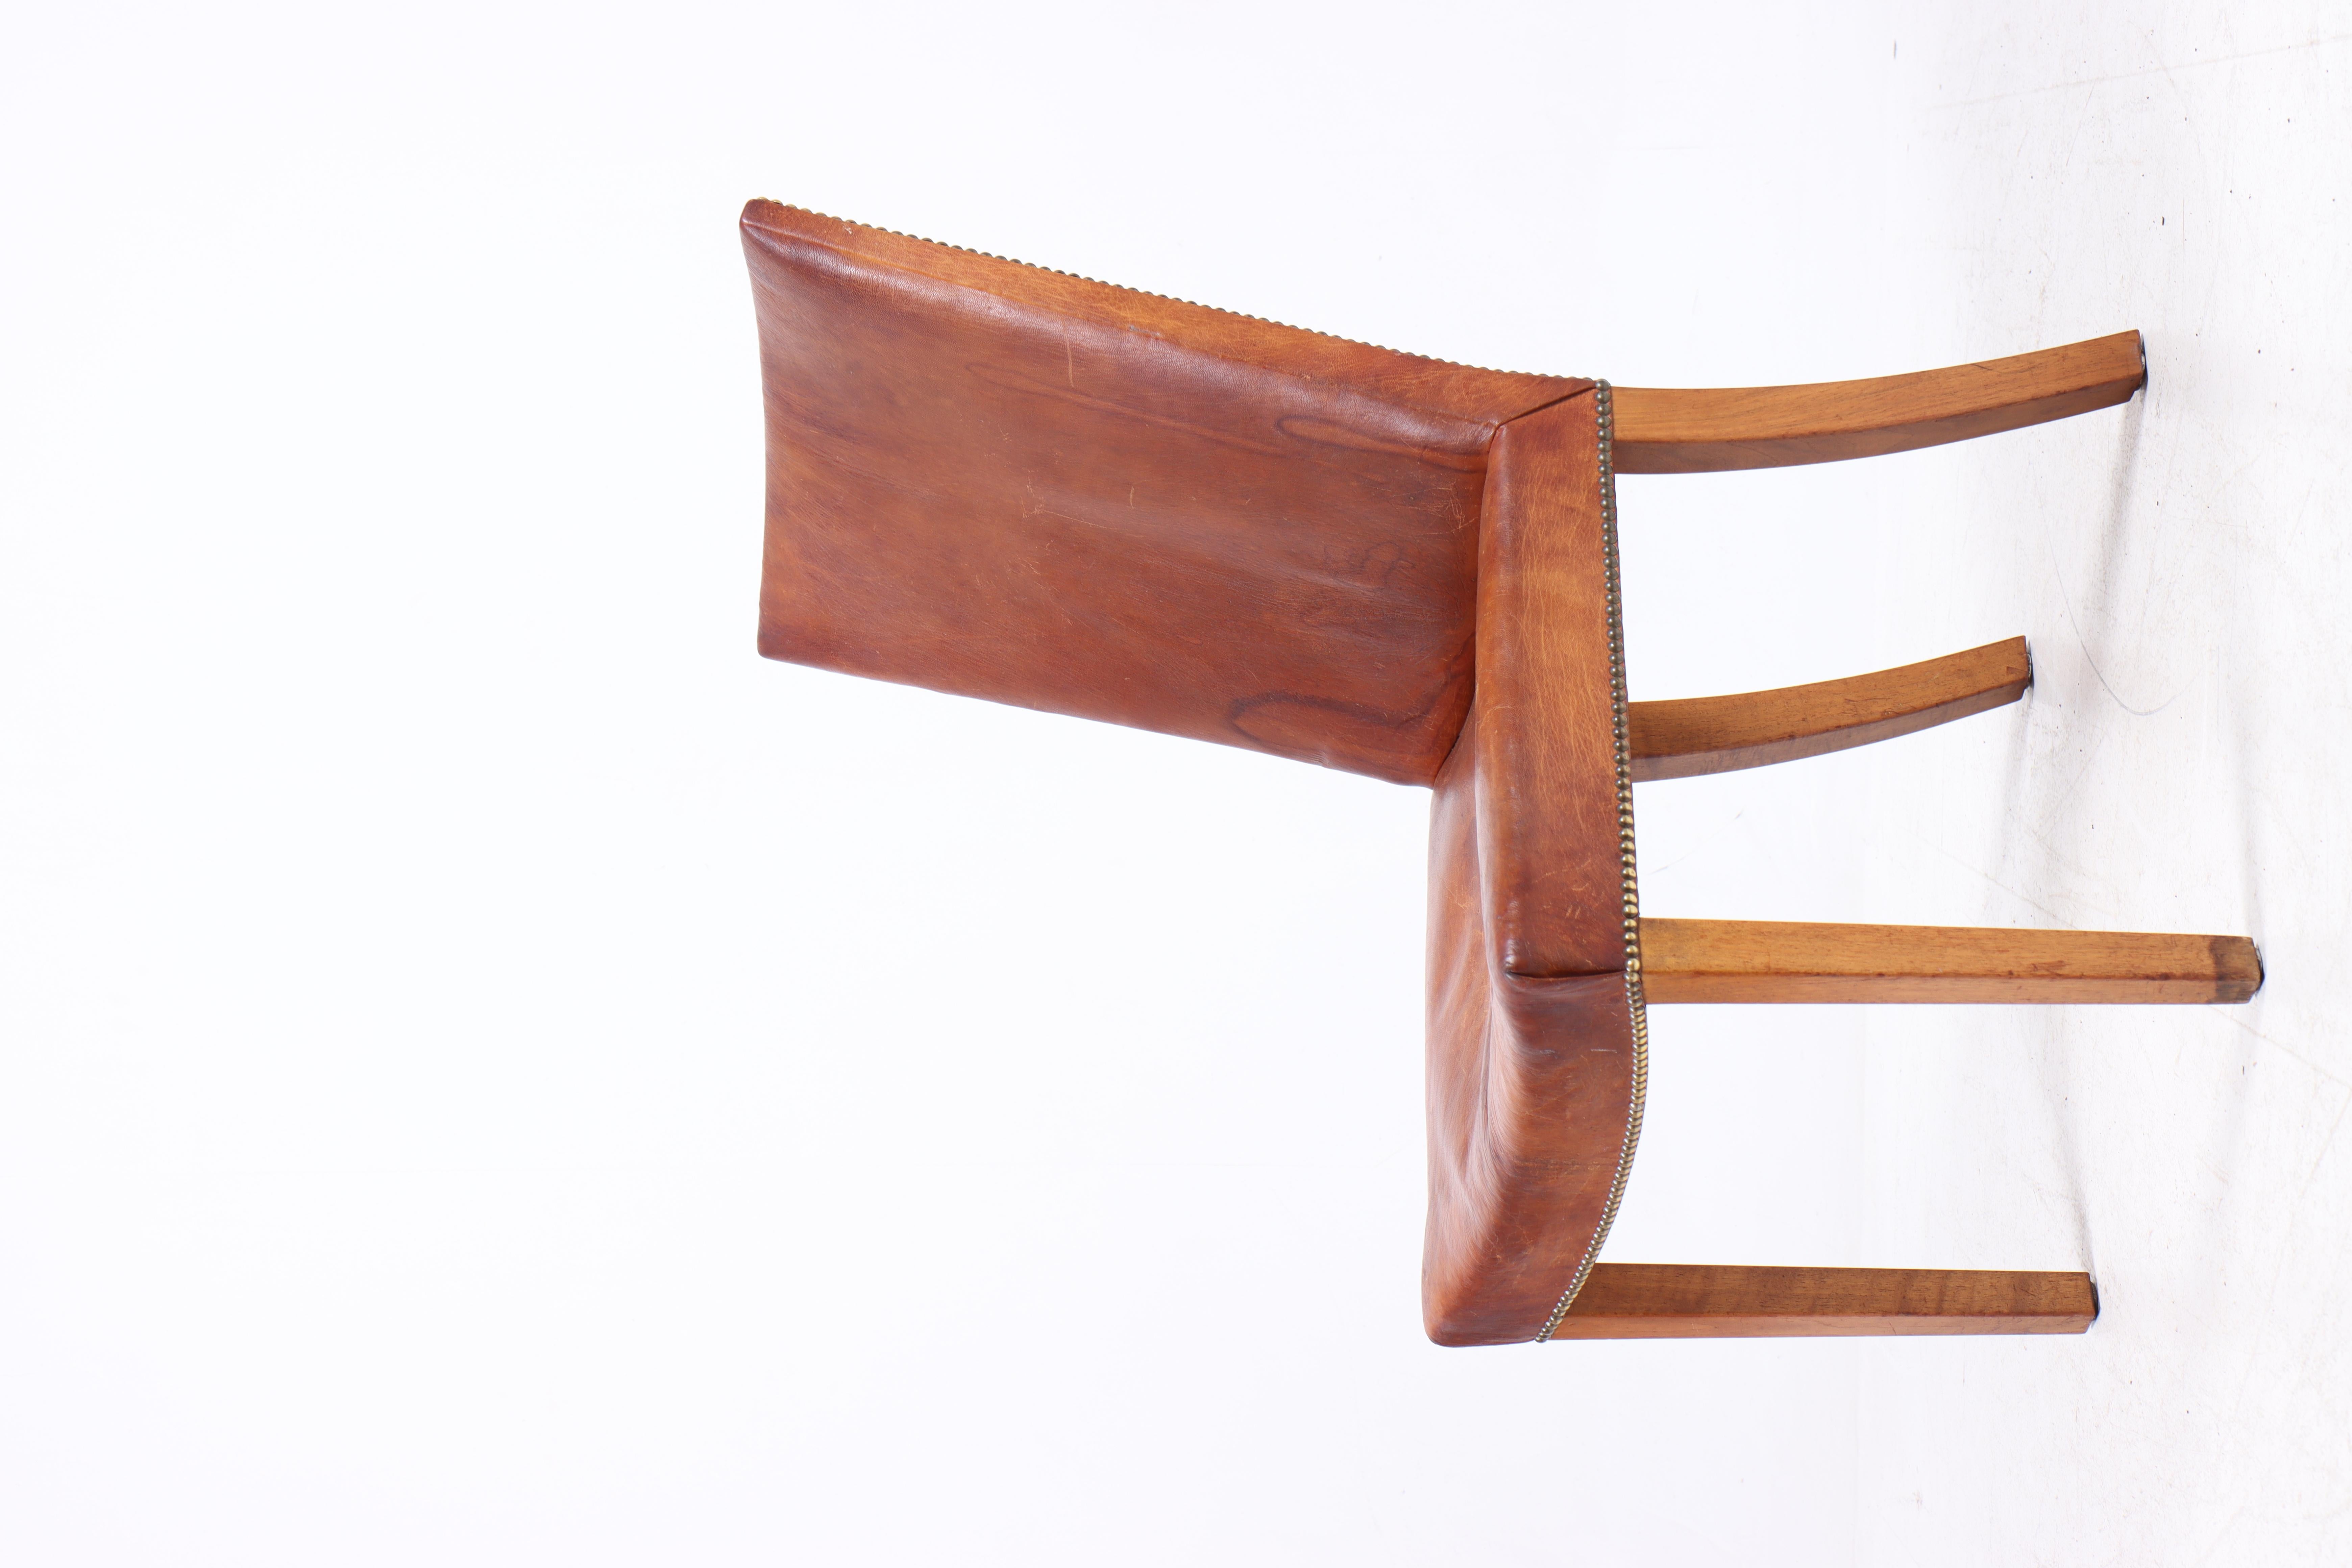 Danish side chair in patinated Niger leather and mahogany. Designed and made in Denmark, great original condition.